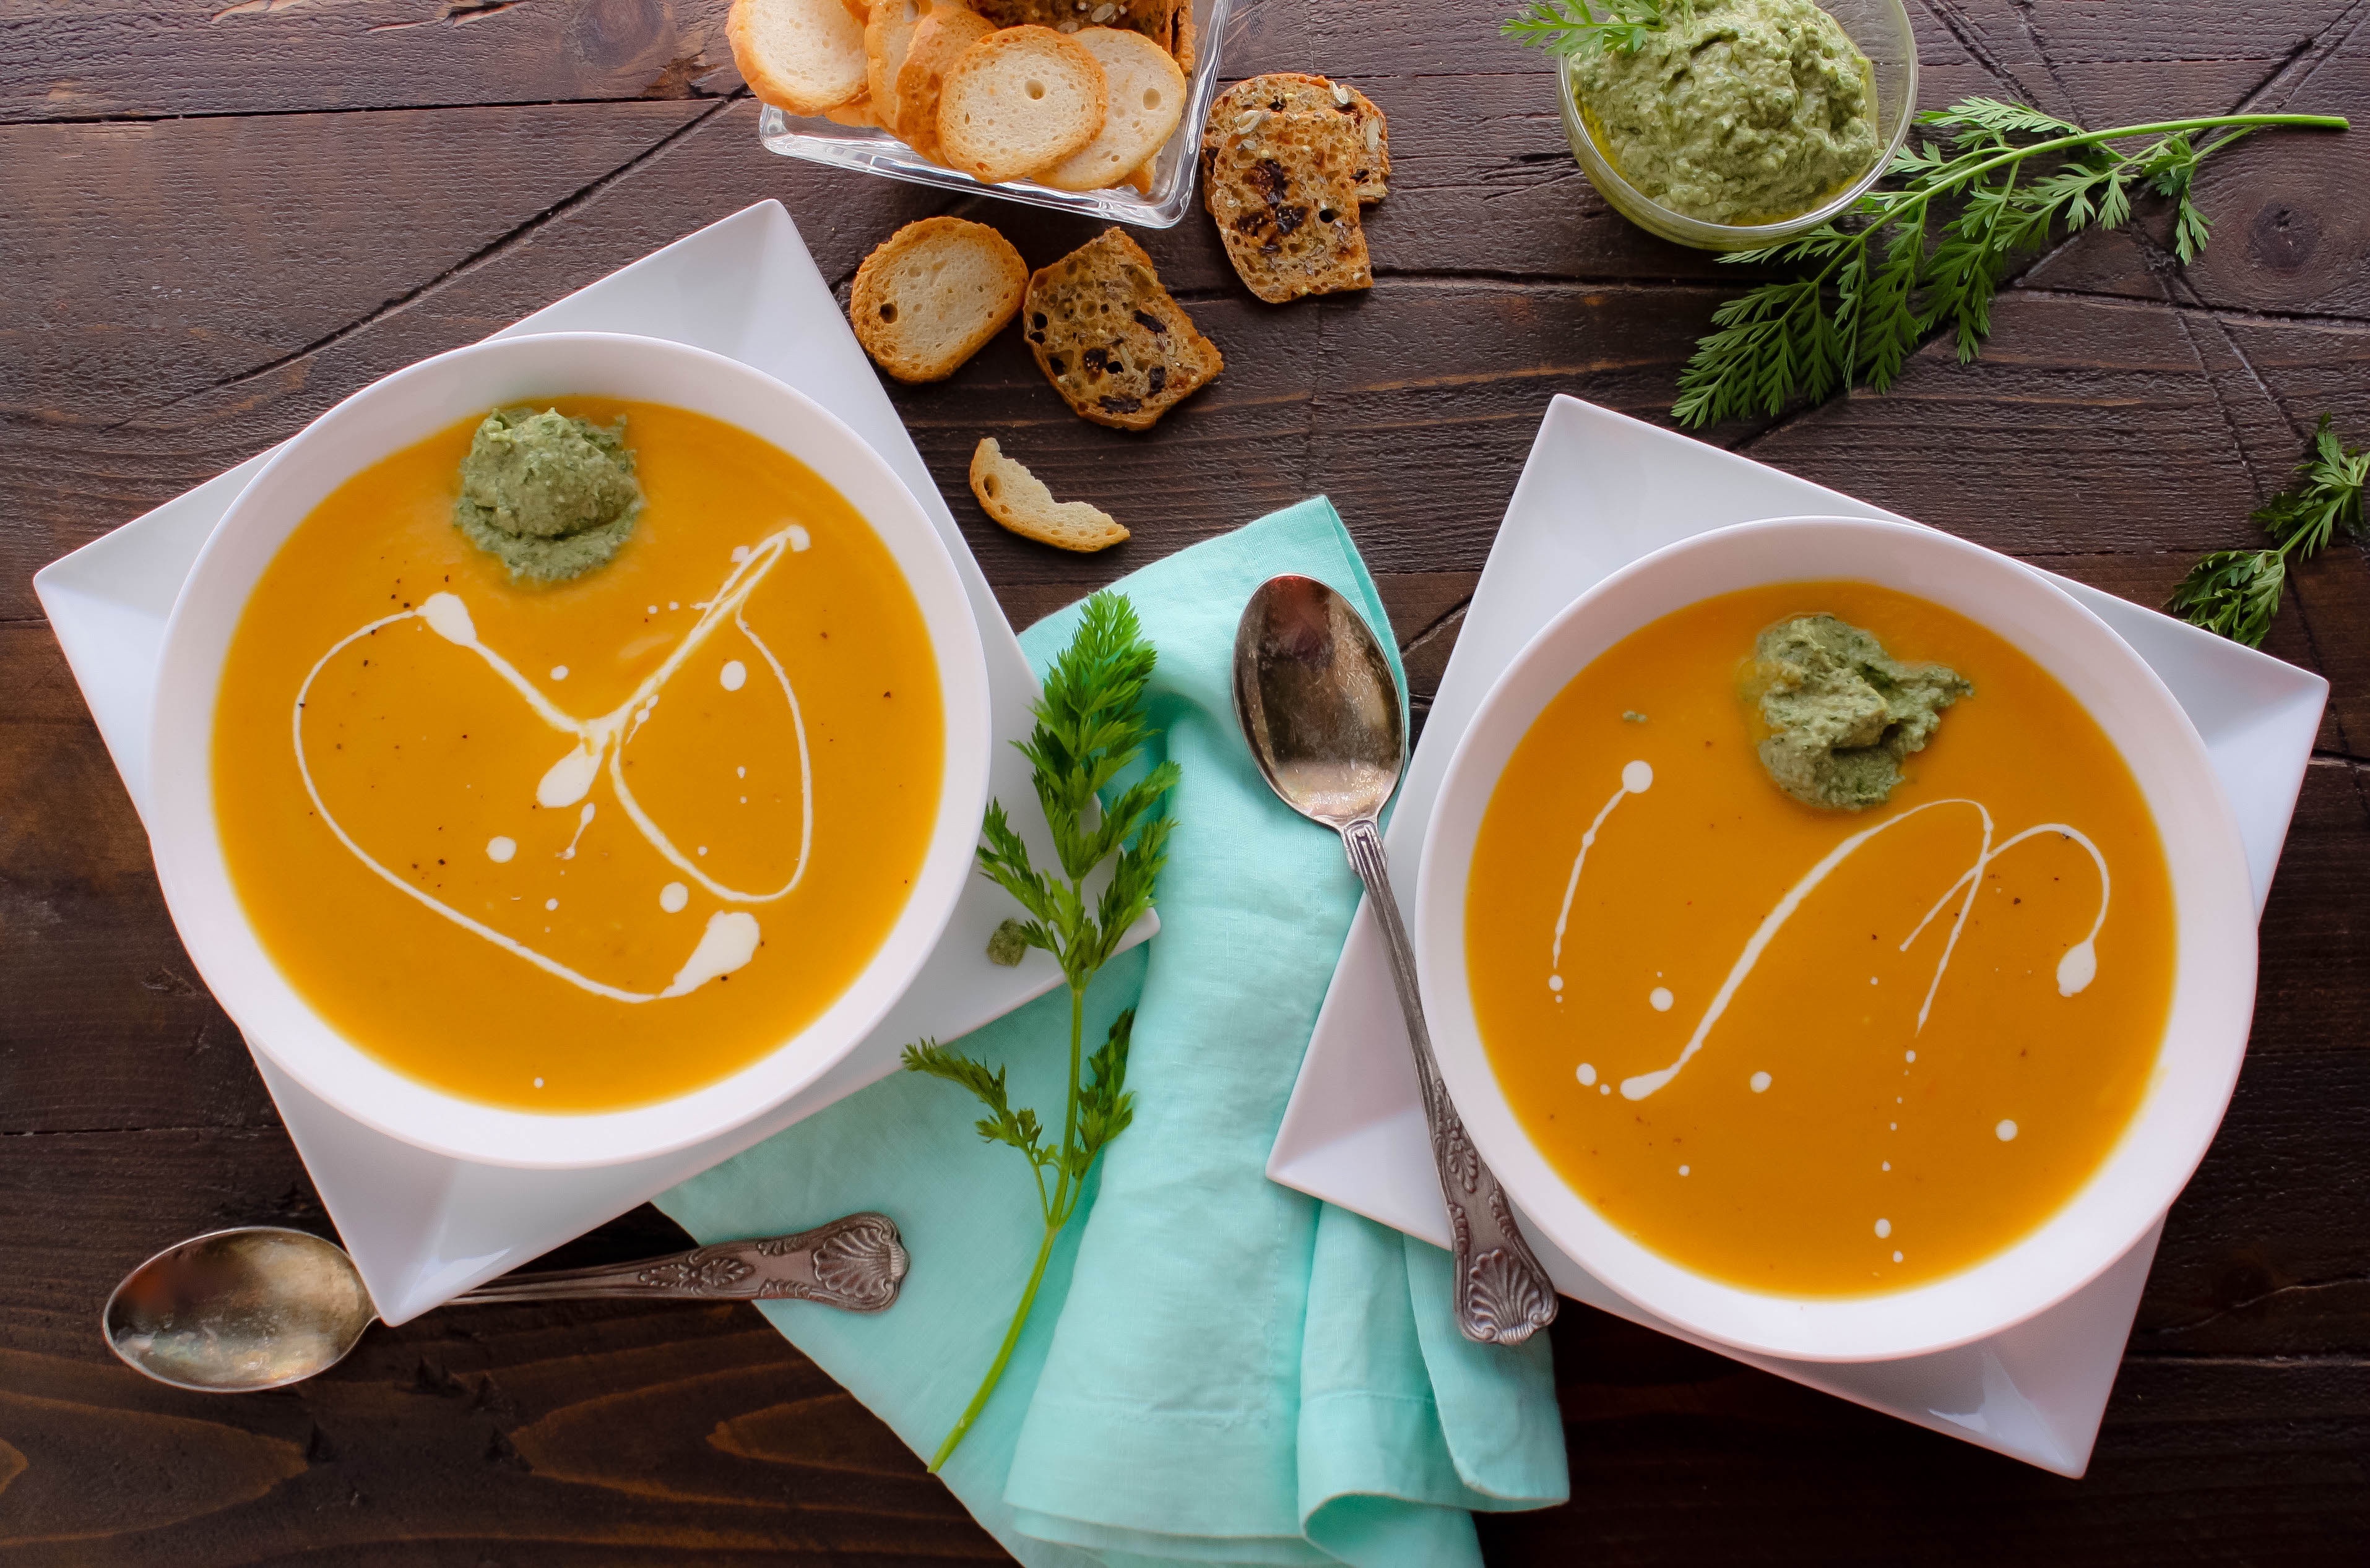 Roasted Carrot and Parsnip Soup with Carrot Greens Pesto is creamy and delicious. You'll love Roasted Carrot and Parsnip Soup with Carrot Greens Pesto for any night of the week.